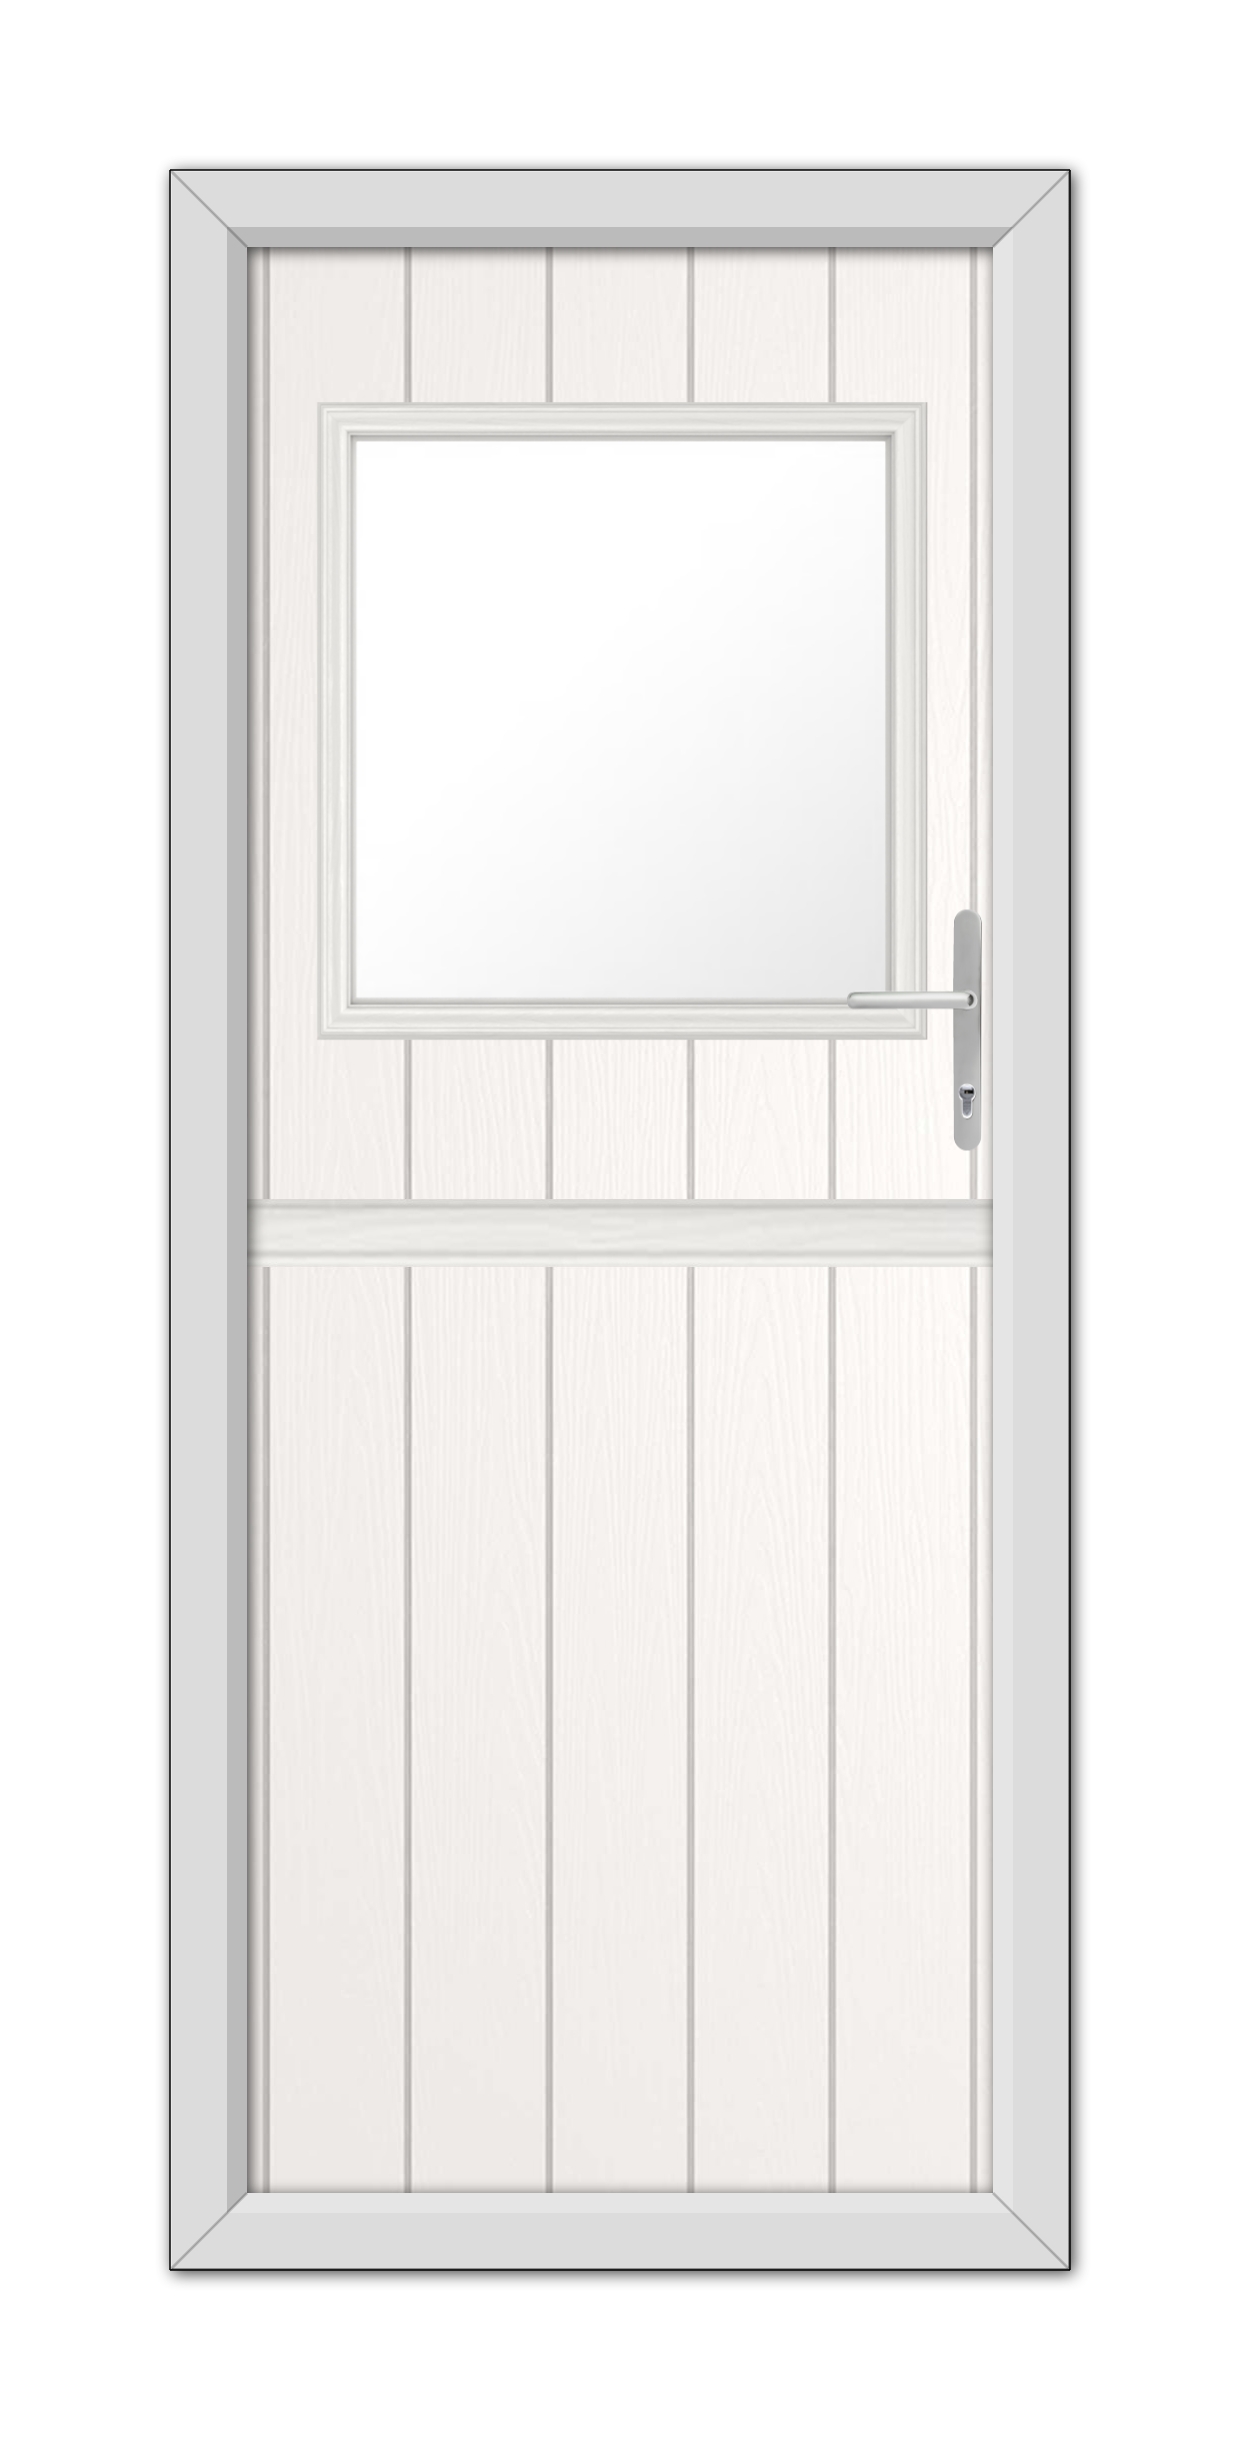 A White Fife Stable Composite Door 48mm Timber Core with a rectangular window and a modern handle, set within a simple frame.